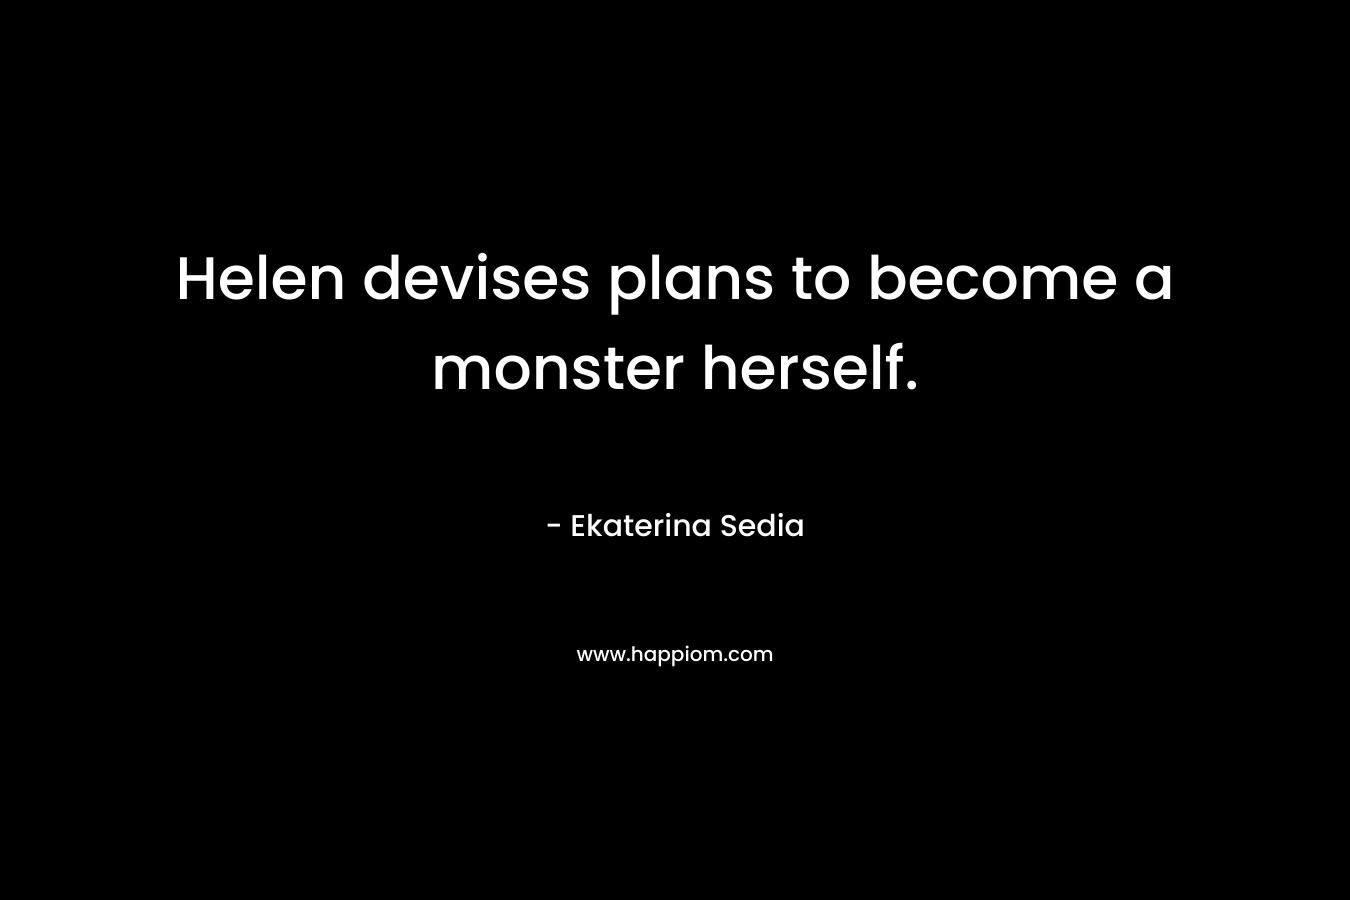 Helen devises plans to become a monster herself. – Ekaterina Sedia